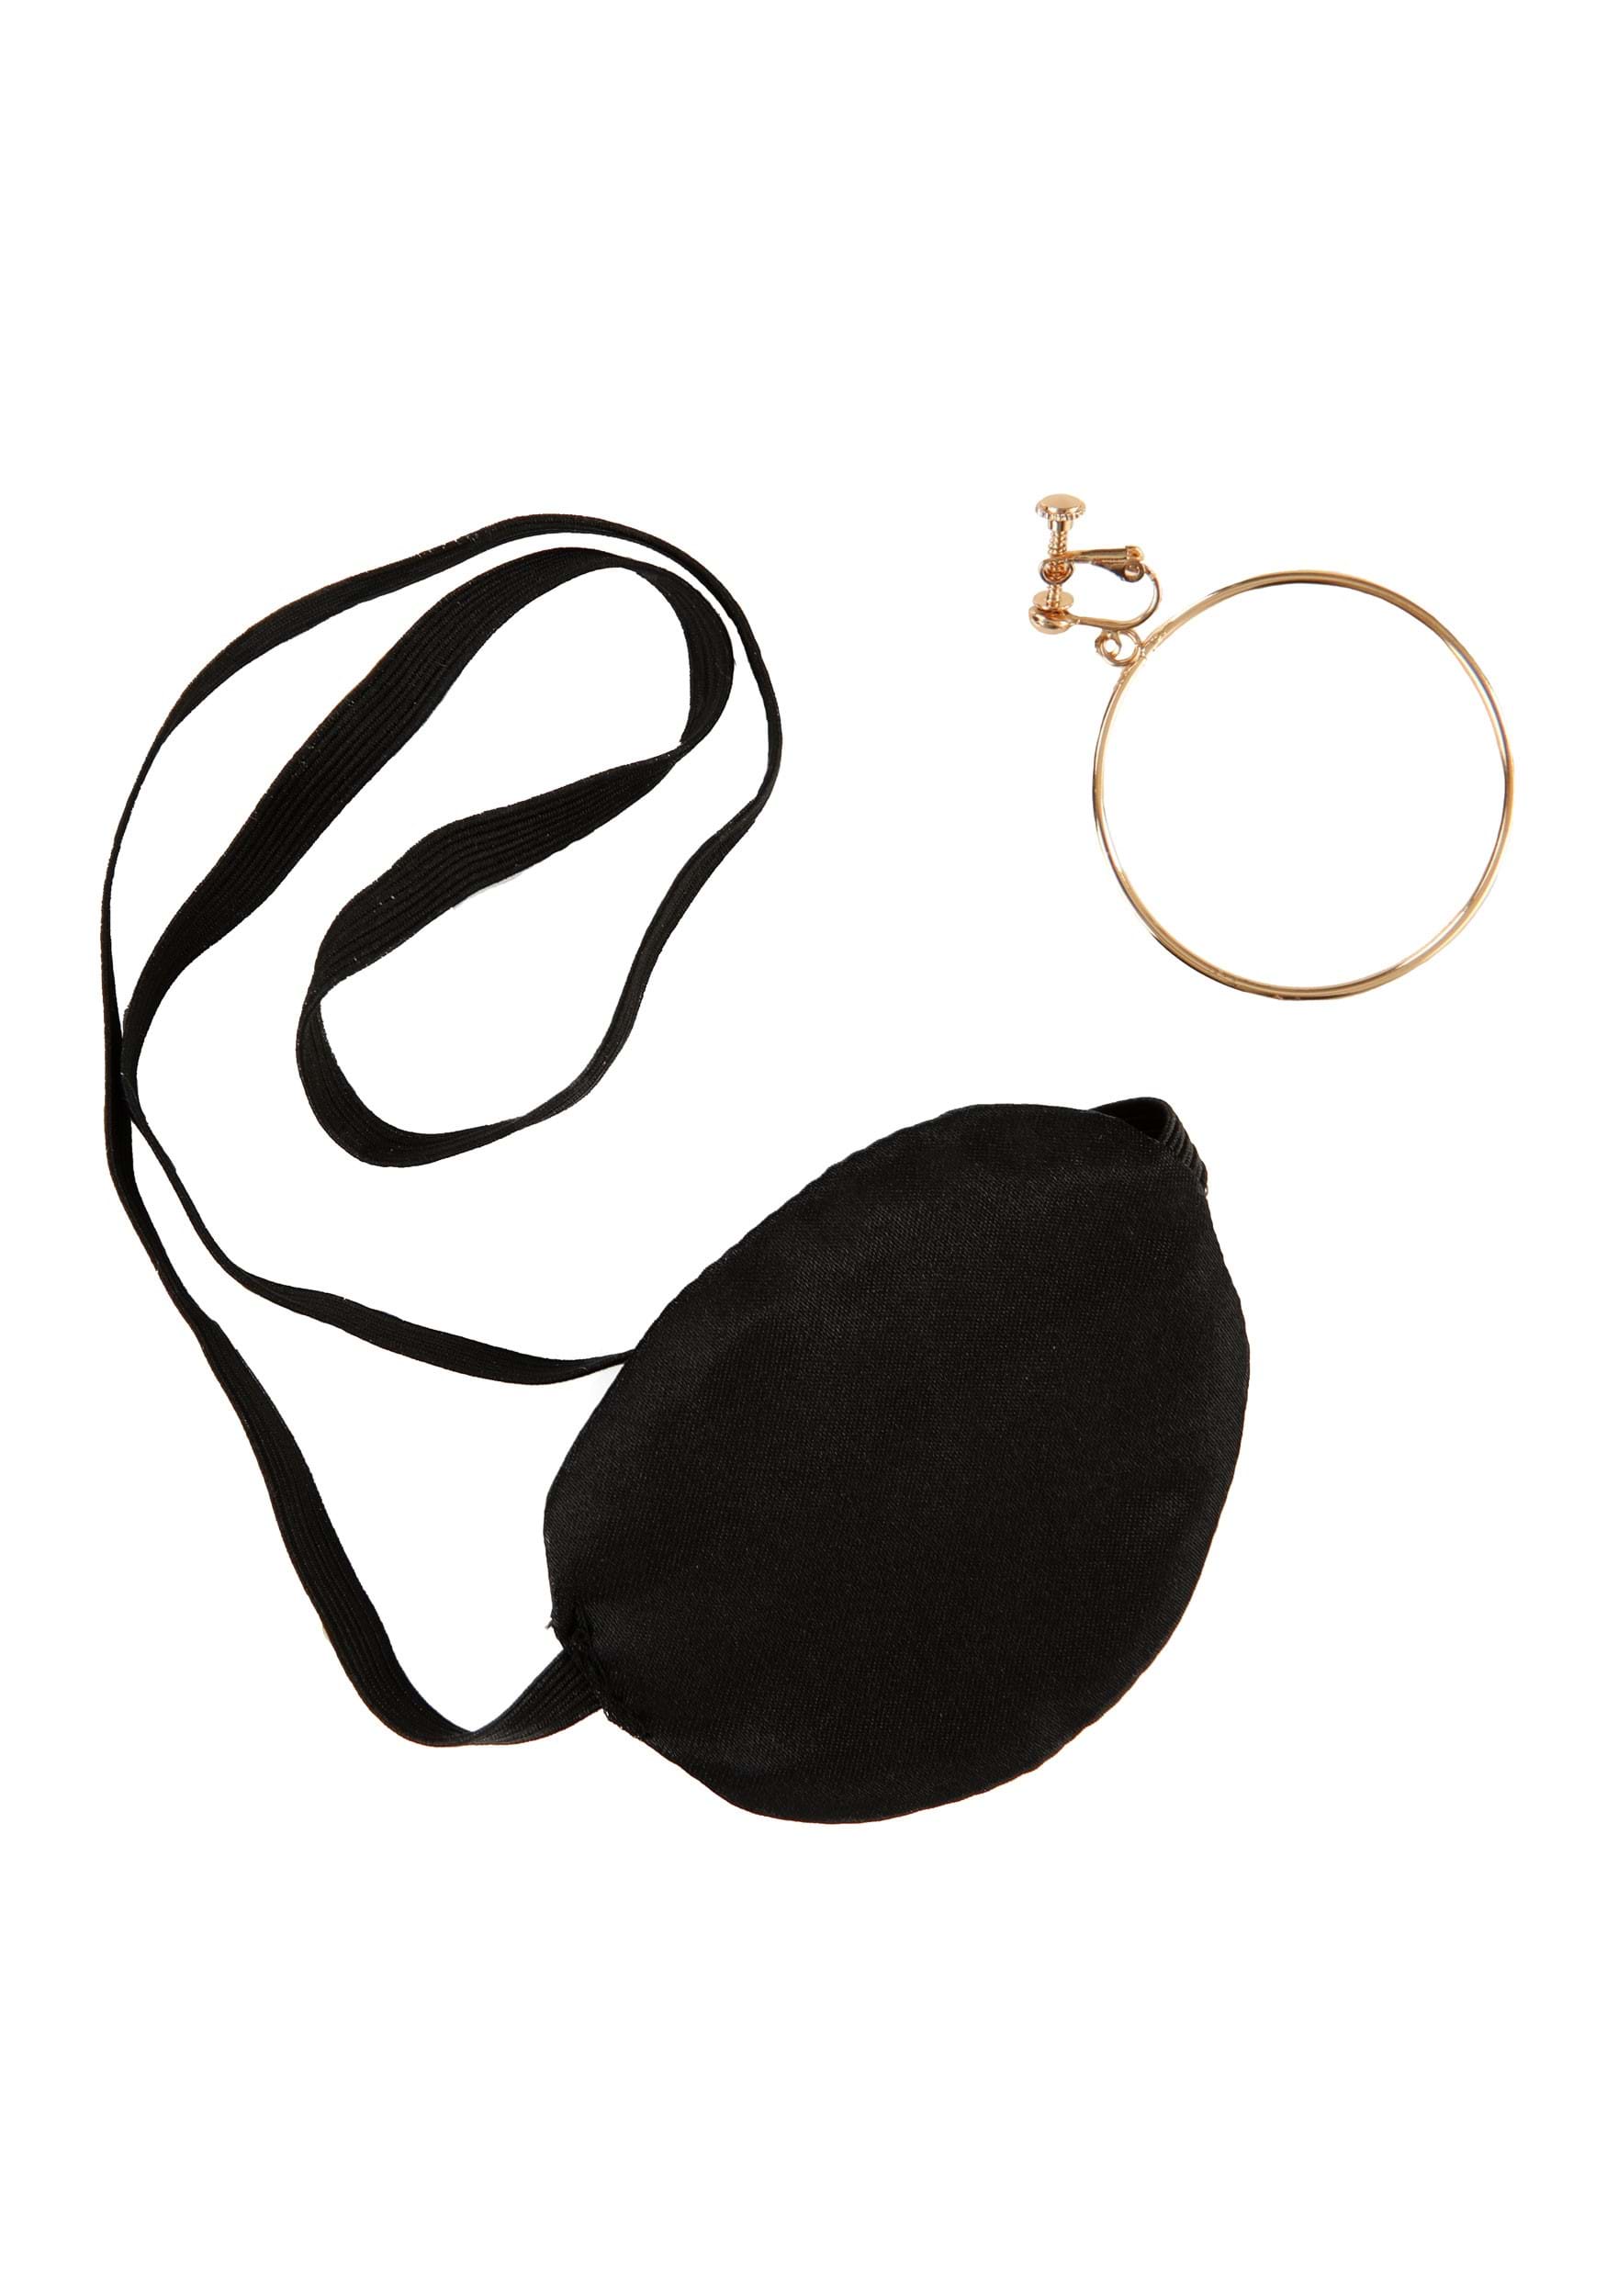 Costume Set Pirate Hook with Eye Patch & Telescope Black